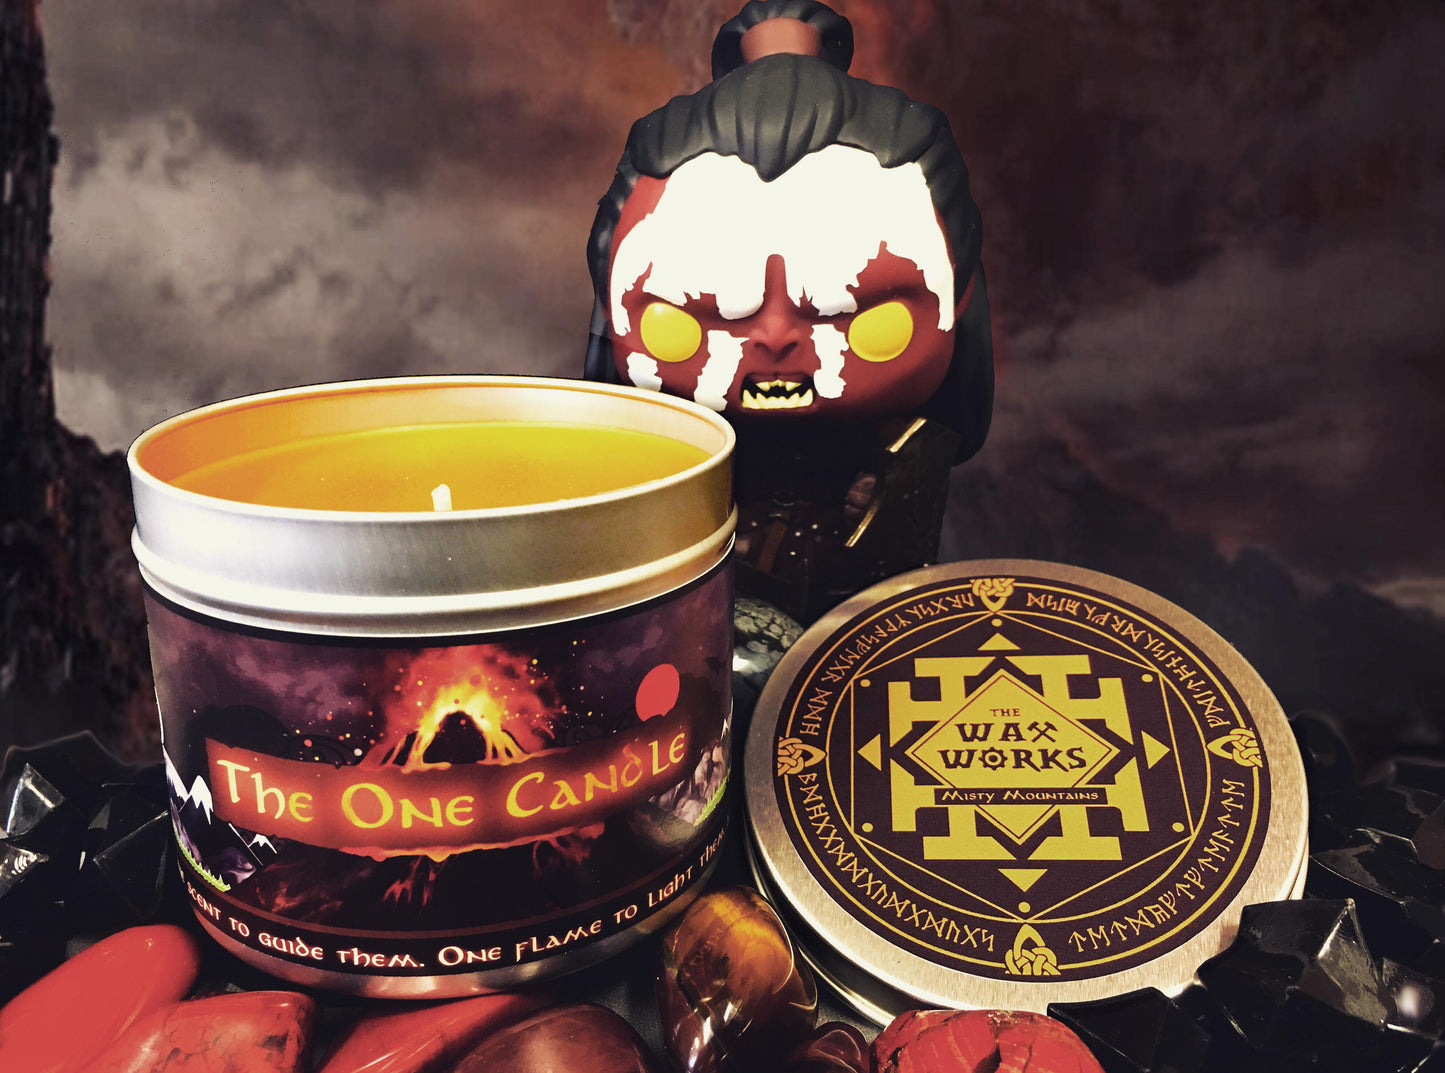 The One Candle with lid off and Lurtz Funko Pop Vinyl